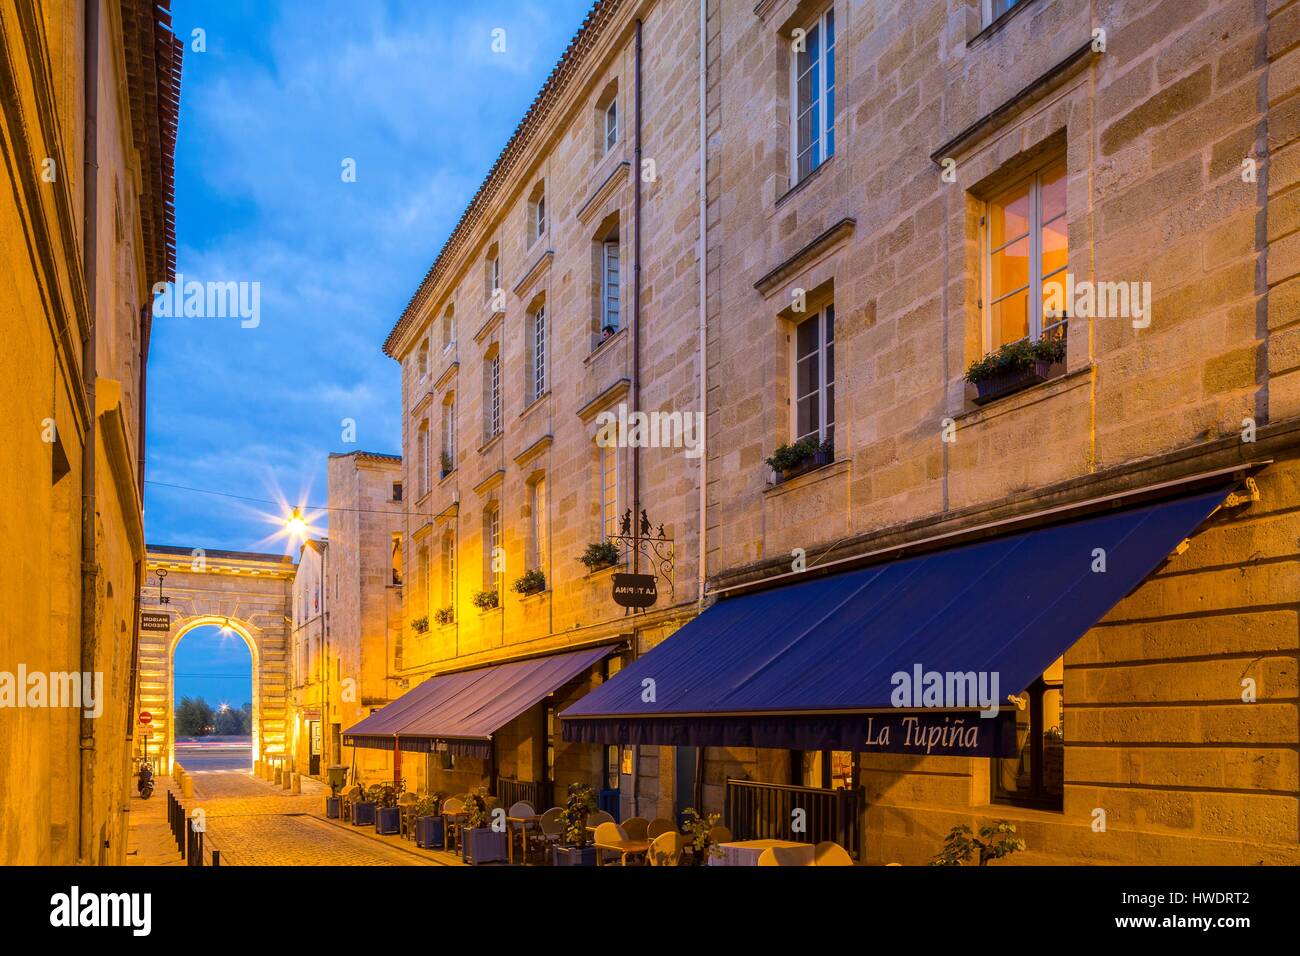 Tupina Bordeaux High Resolution Stock Photography and Images - Alamy